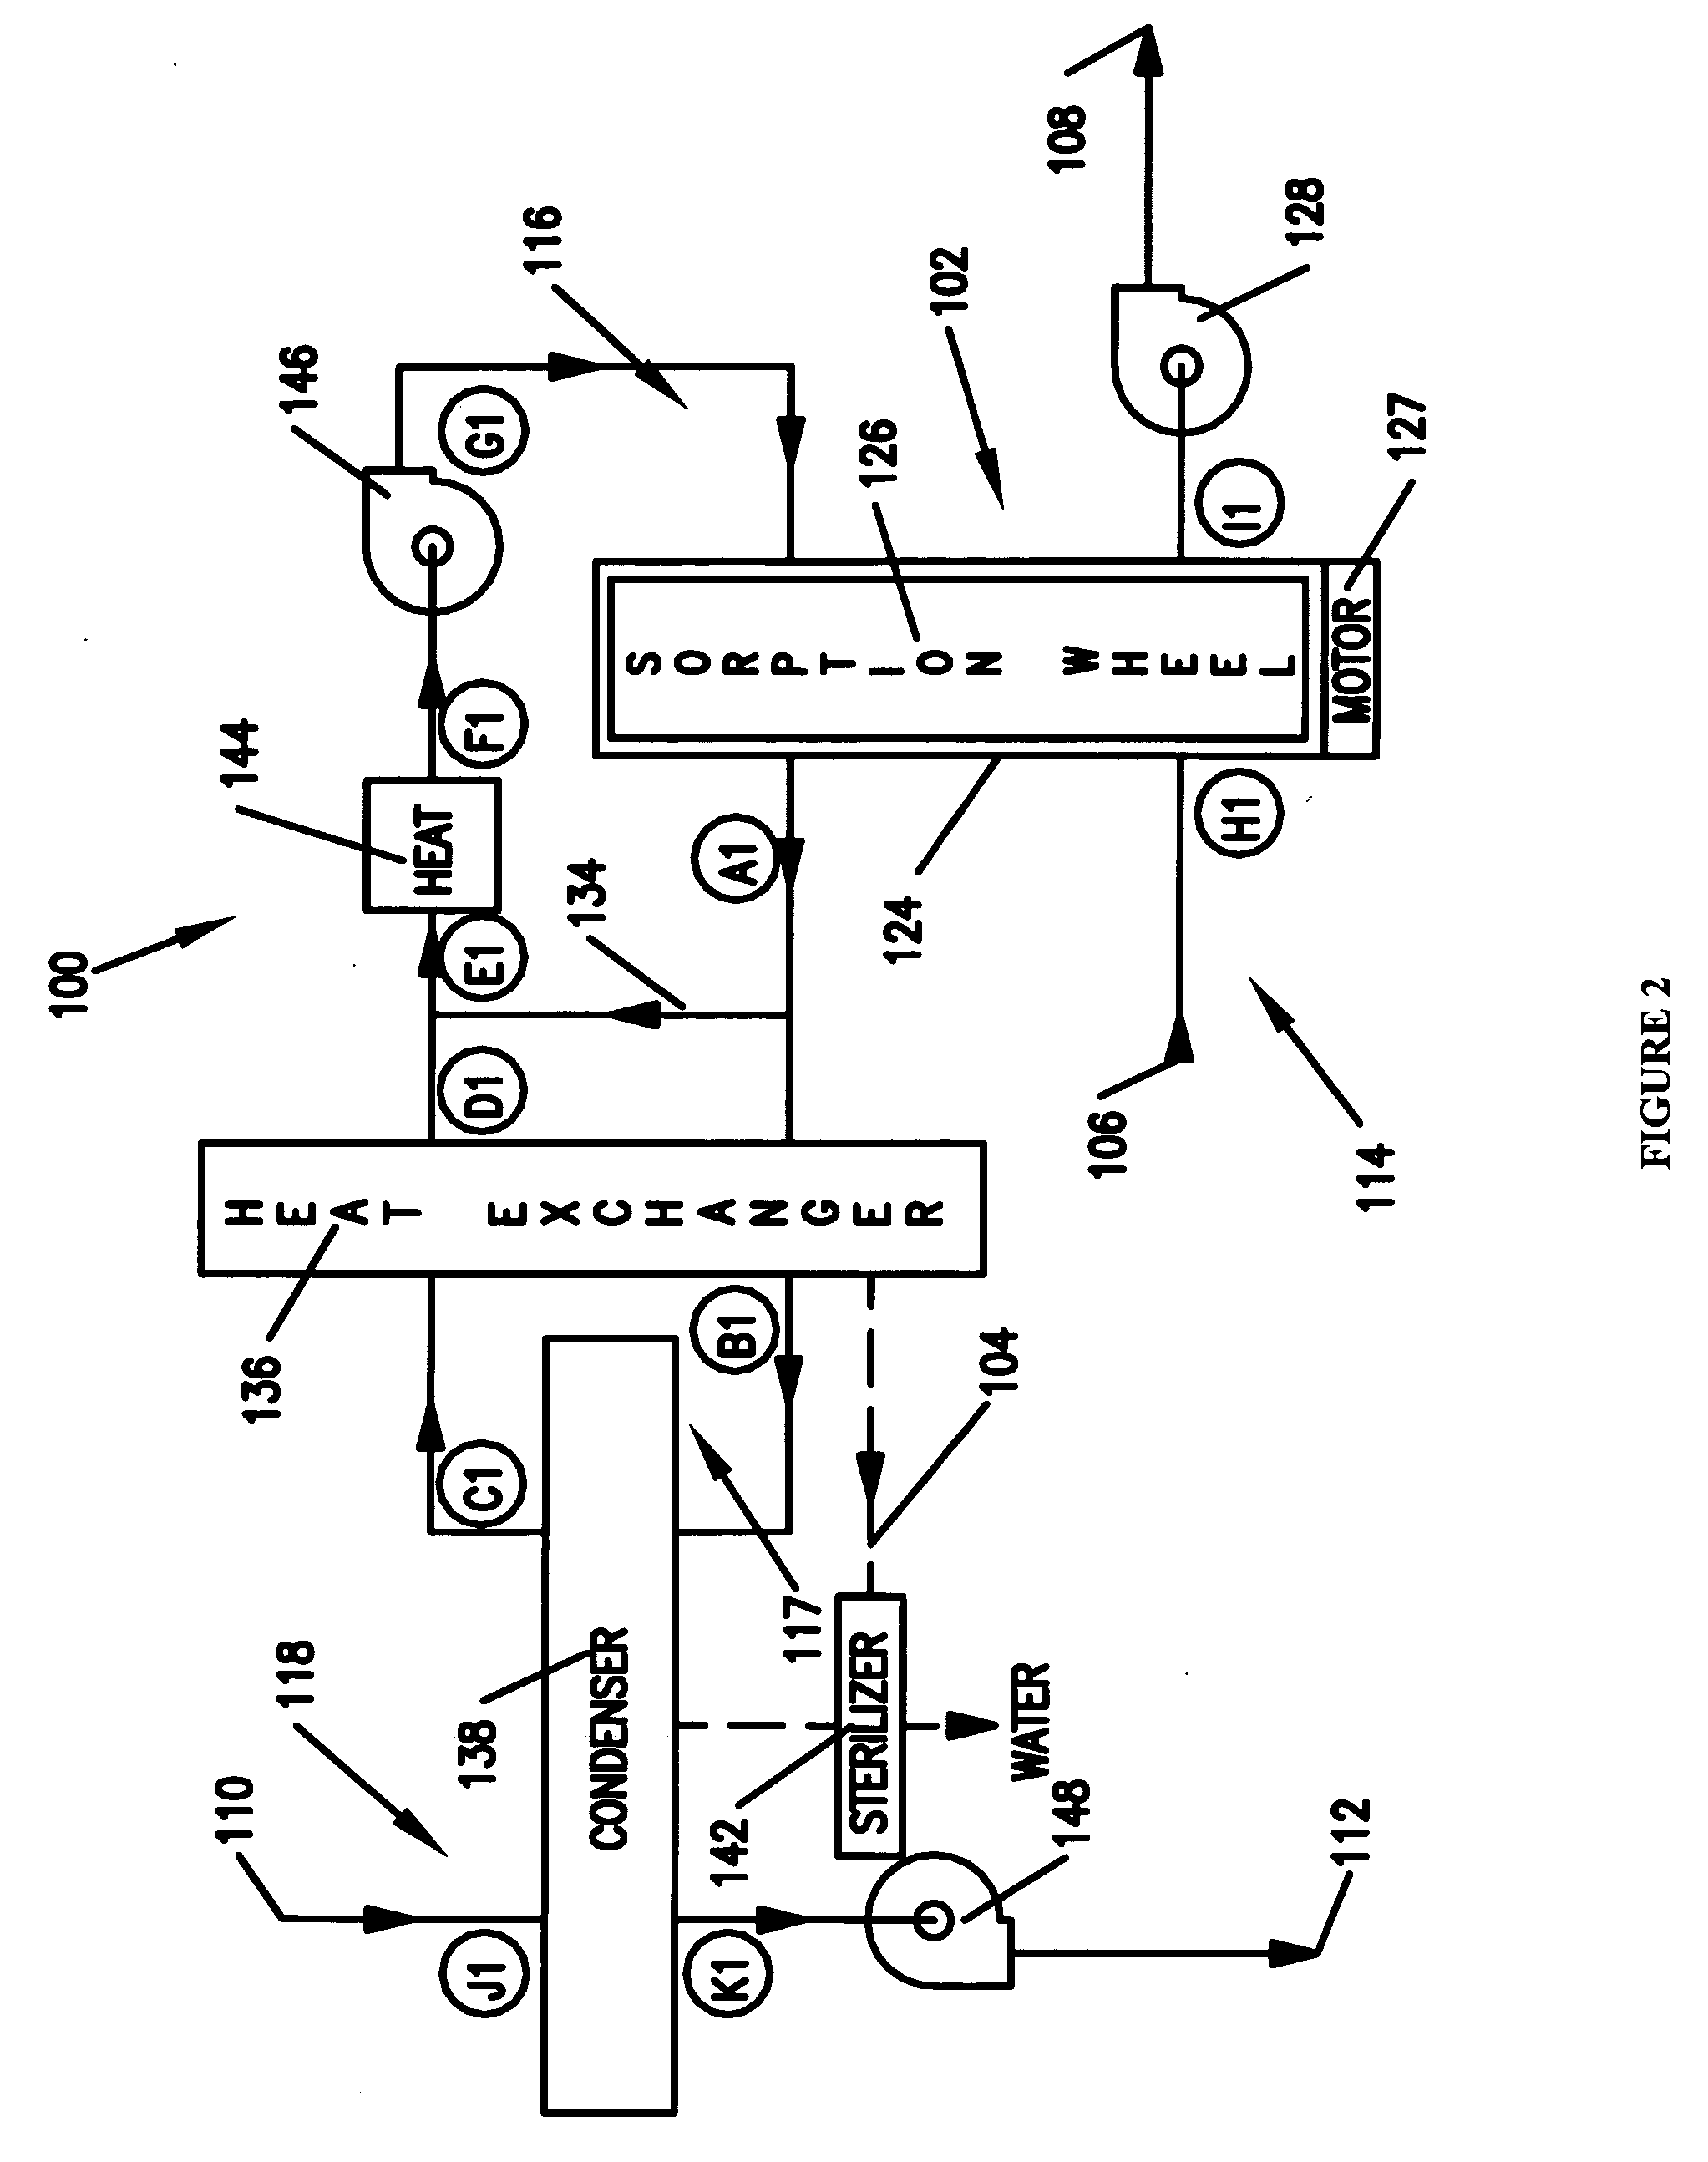 Method and apparatus for producing potable water from air including severely arid and hot climates